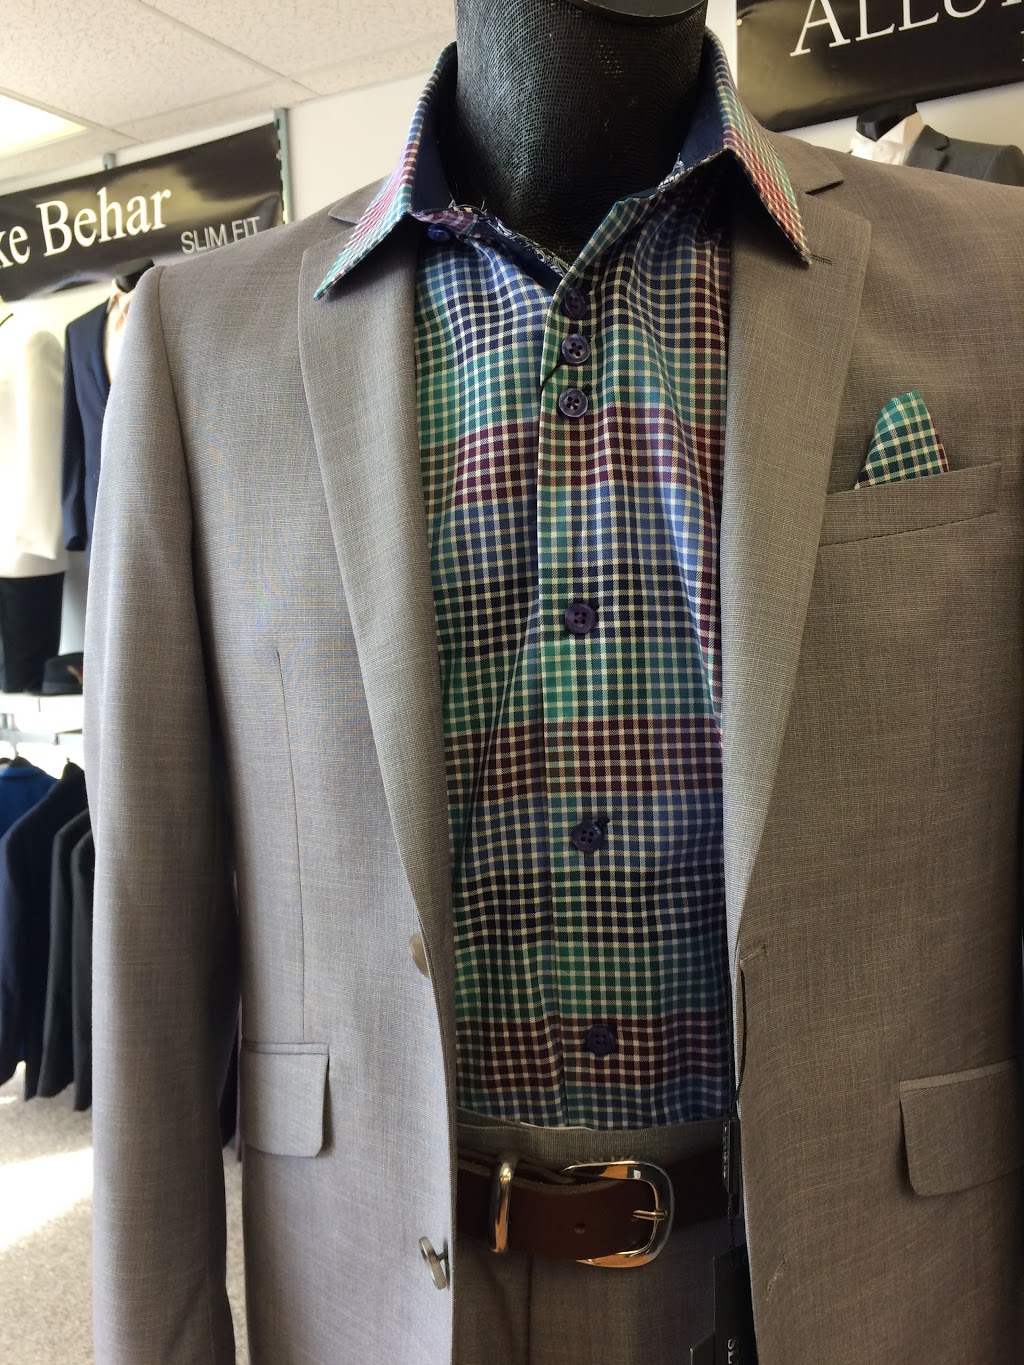 Collins Formal Wear | clothing store | 331 Bayfield St, Barrie, ON L4M 3C2, Canada | 7057350227 OR +1 705-735-0227